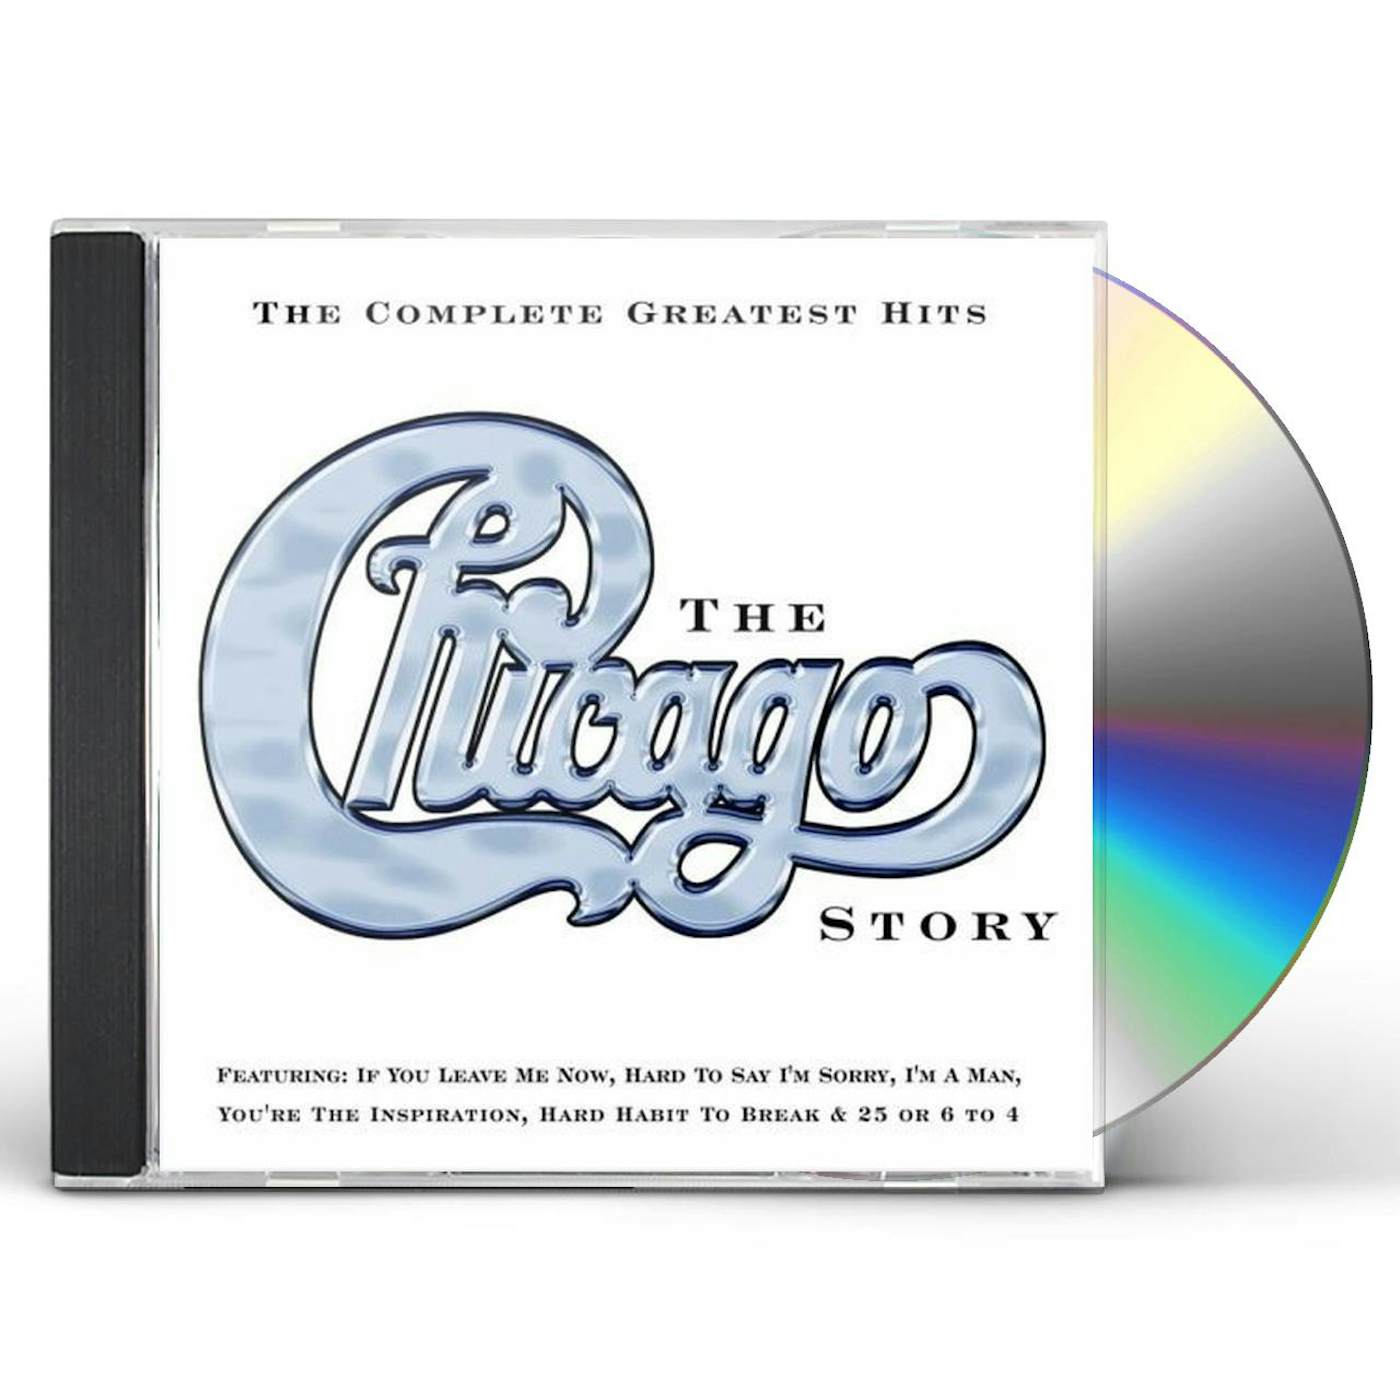 CHICAGO STORY: COMPLETE GREATEST CD